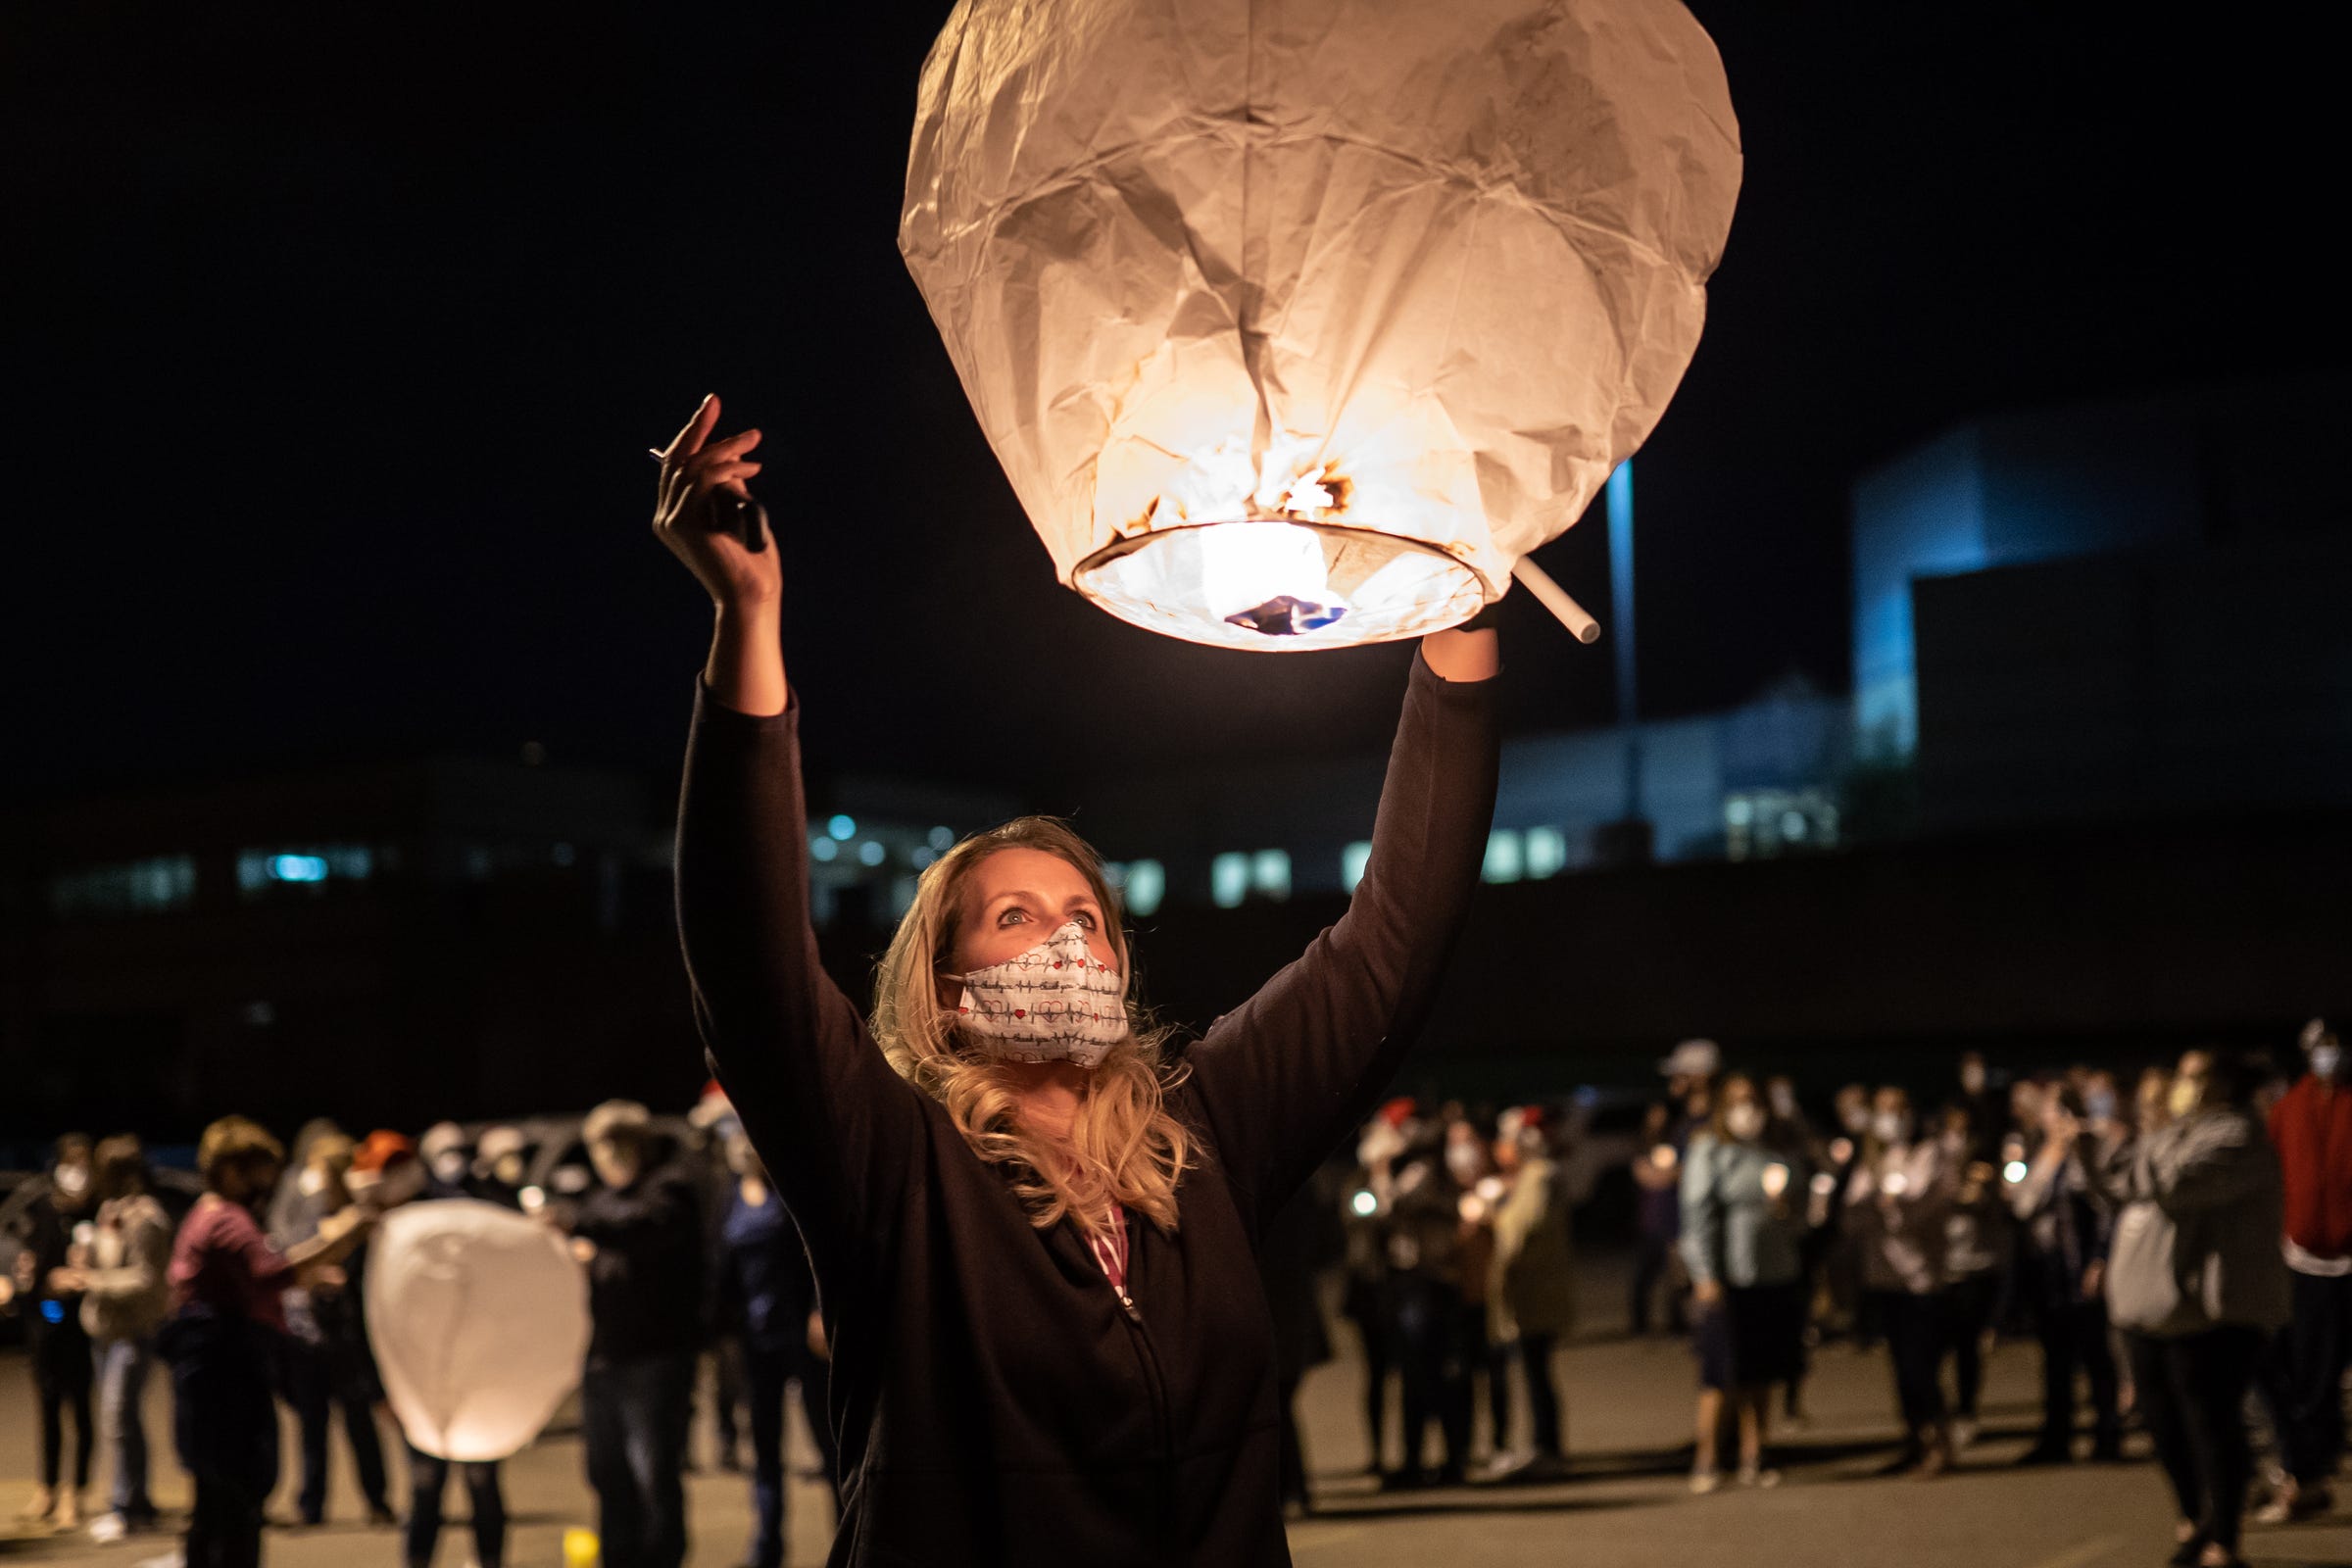 McLaren Flint nurse Vikki Inman releases a paper lantern during a candlelight memorial and prayer on Monday, November 9, 2020 at St Paul Lutheran Church in Flint for the late Santa Staples, a fellow nurse at the hospital who passed away from COVID-19.